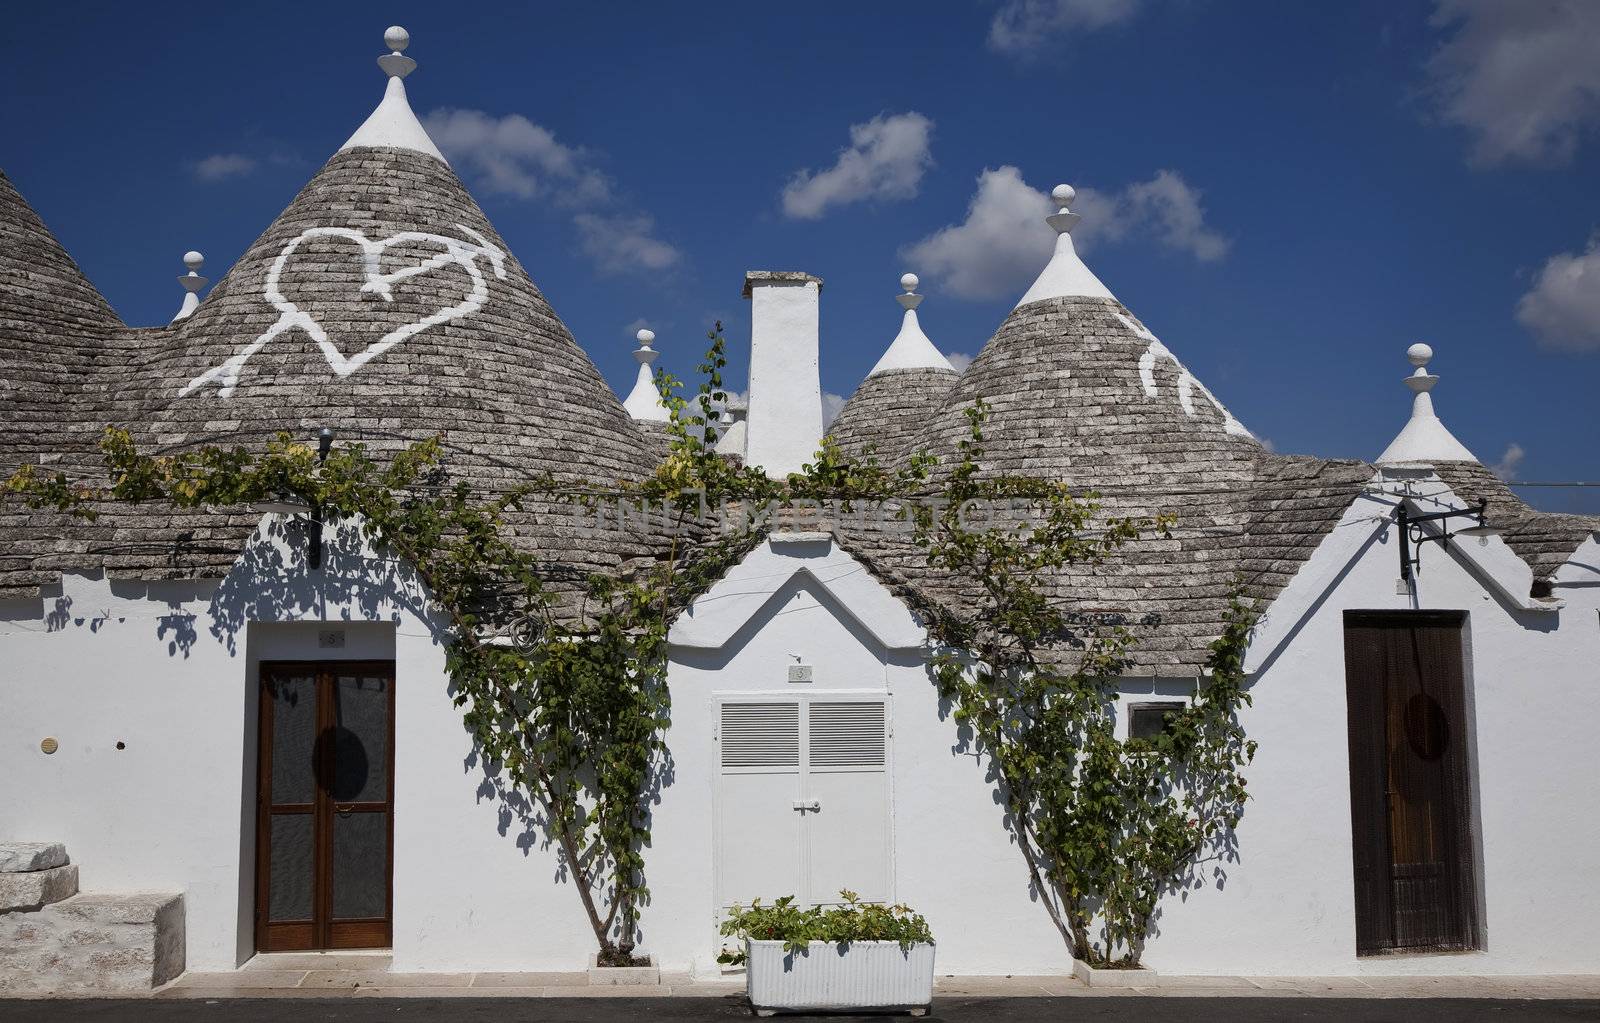 Urban Alberobello - Italy. A trullo is a traditional Apulian stone dwelling with a conical roof. The style of construction is specific to Itria Valley.